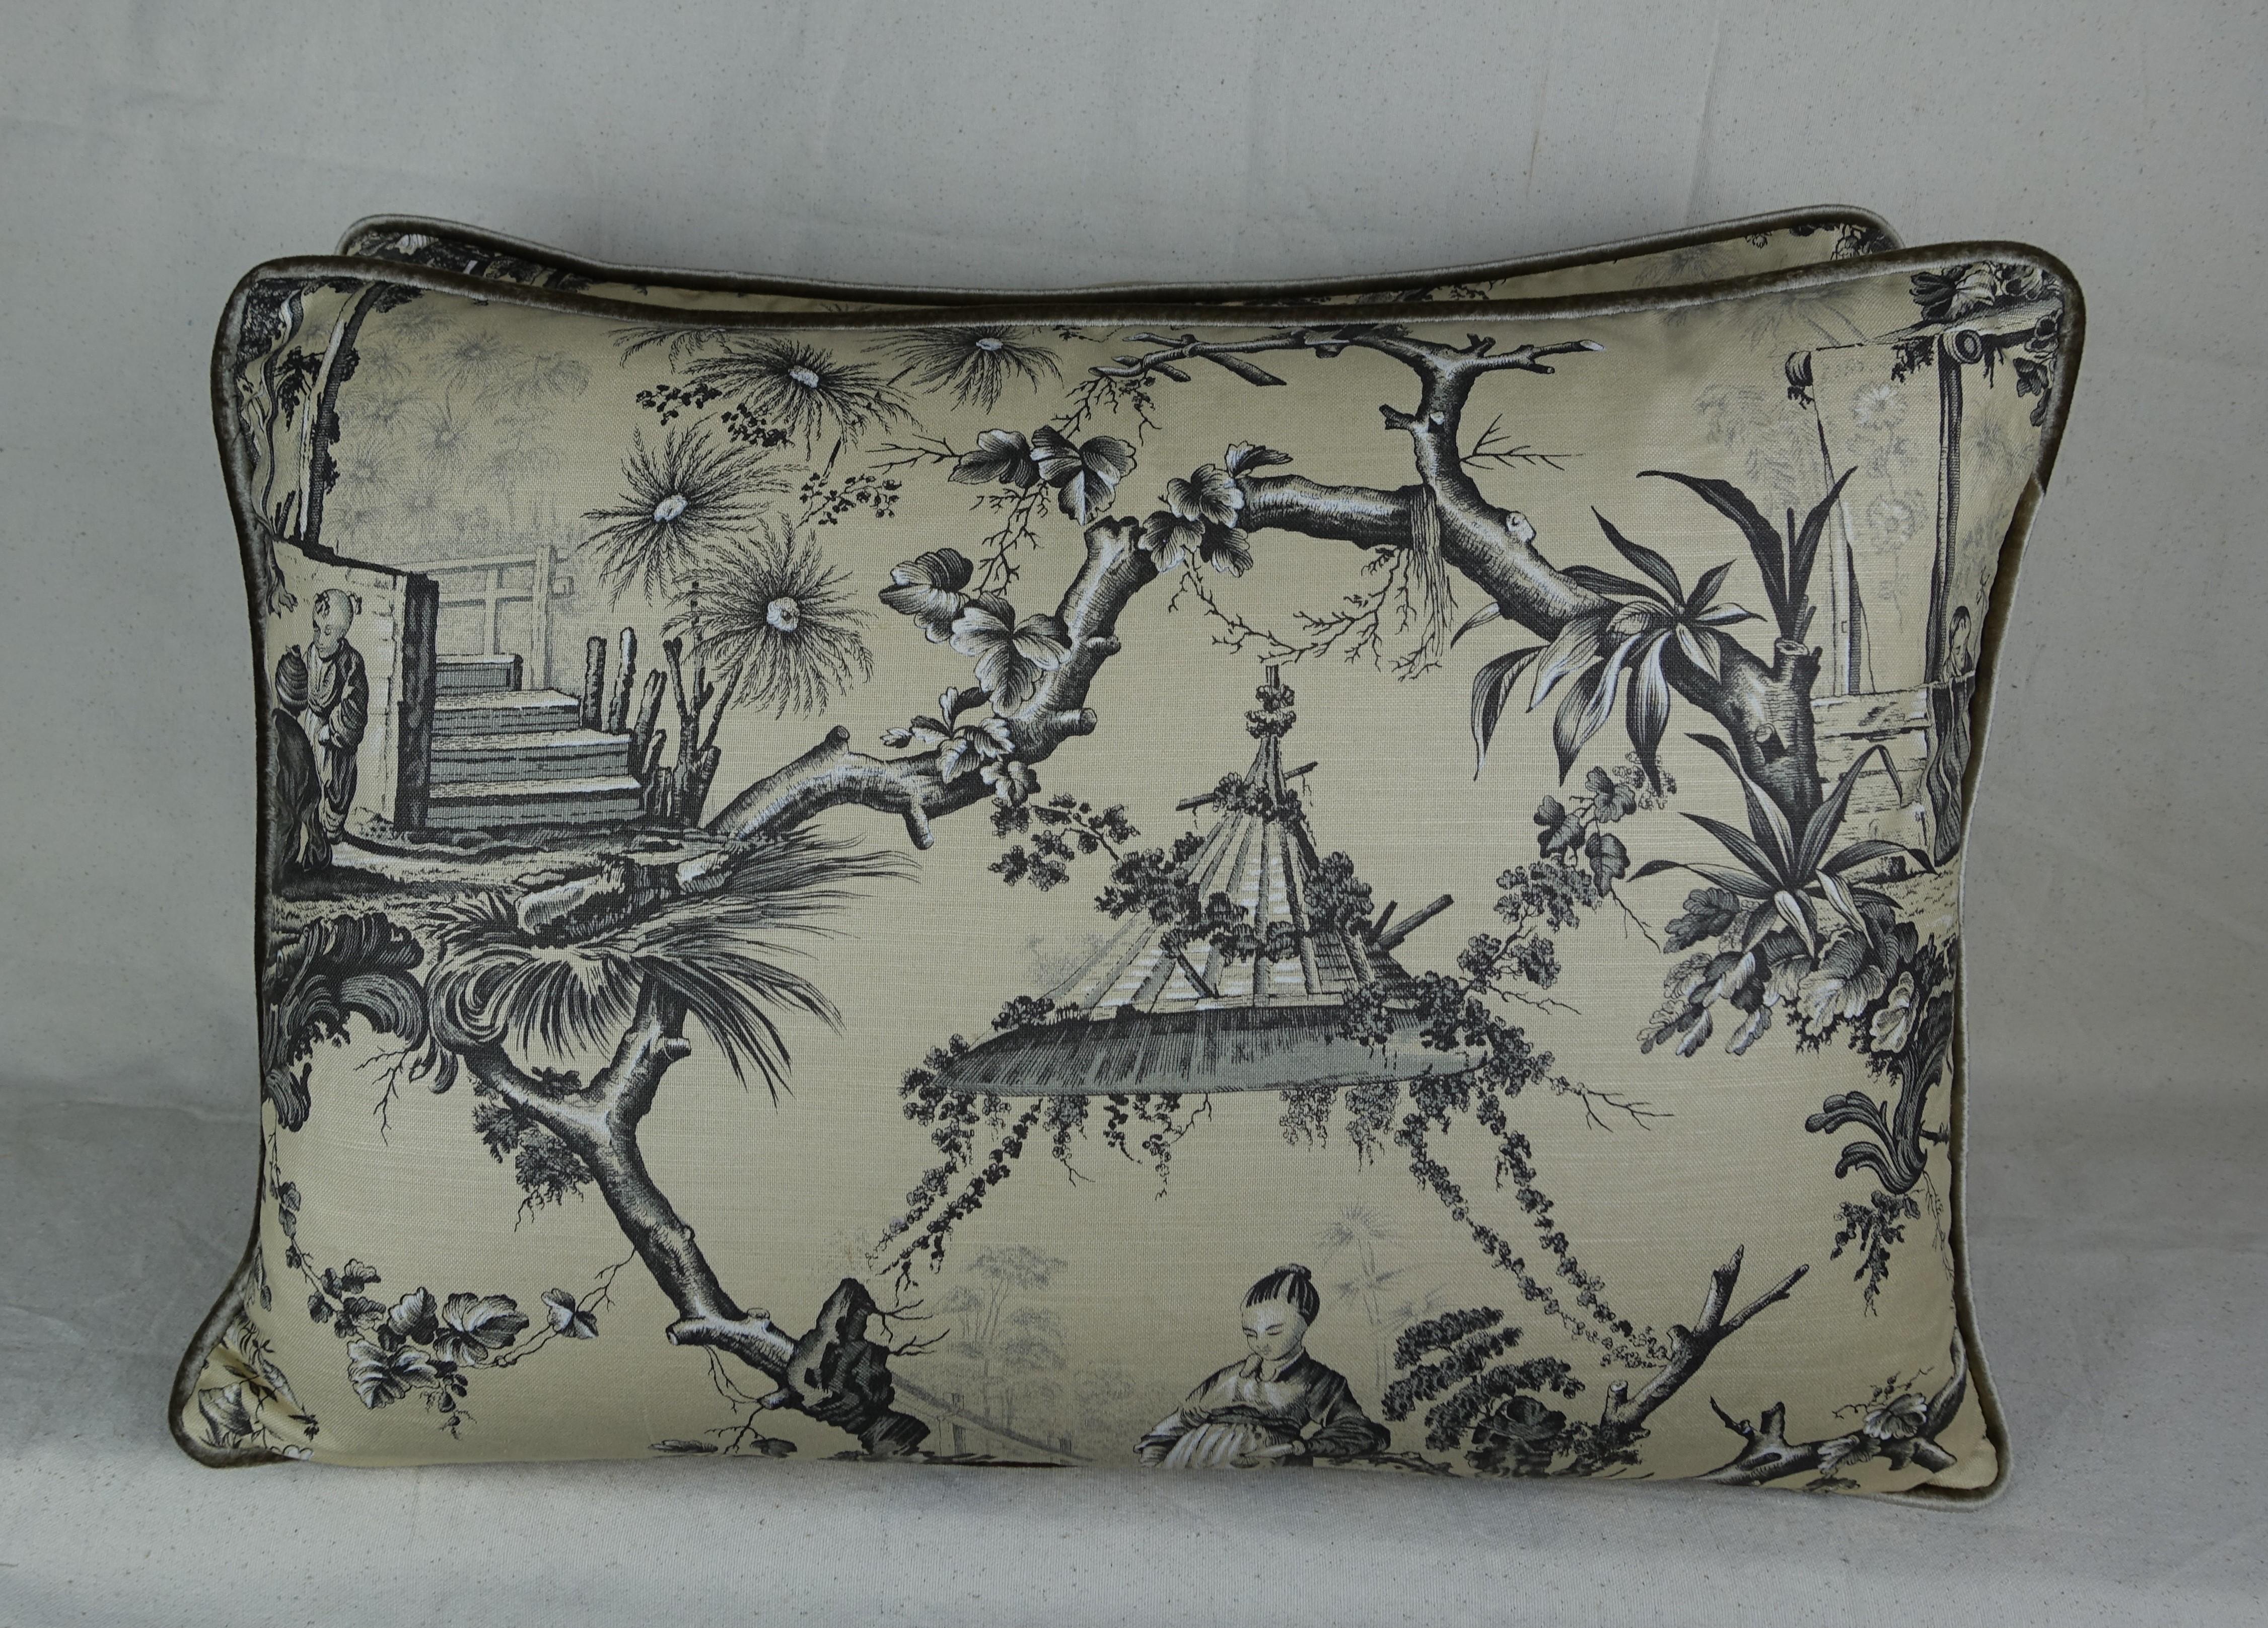 Contemporary Brunschwig & Fils Chinoiserie Textile Pillows, Pair For Sale